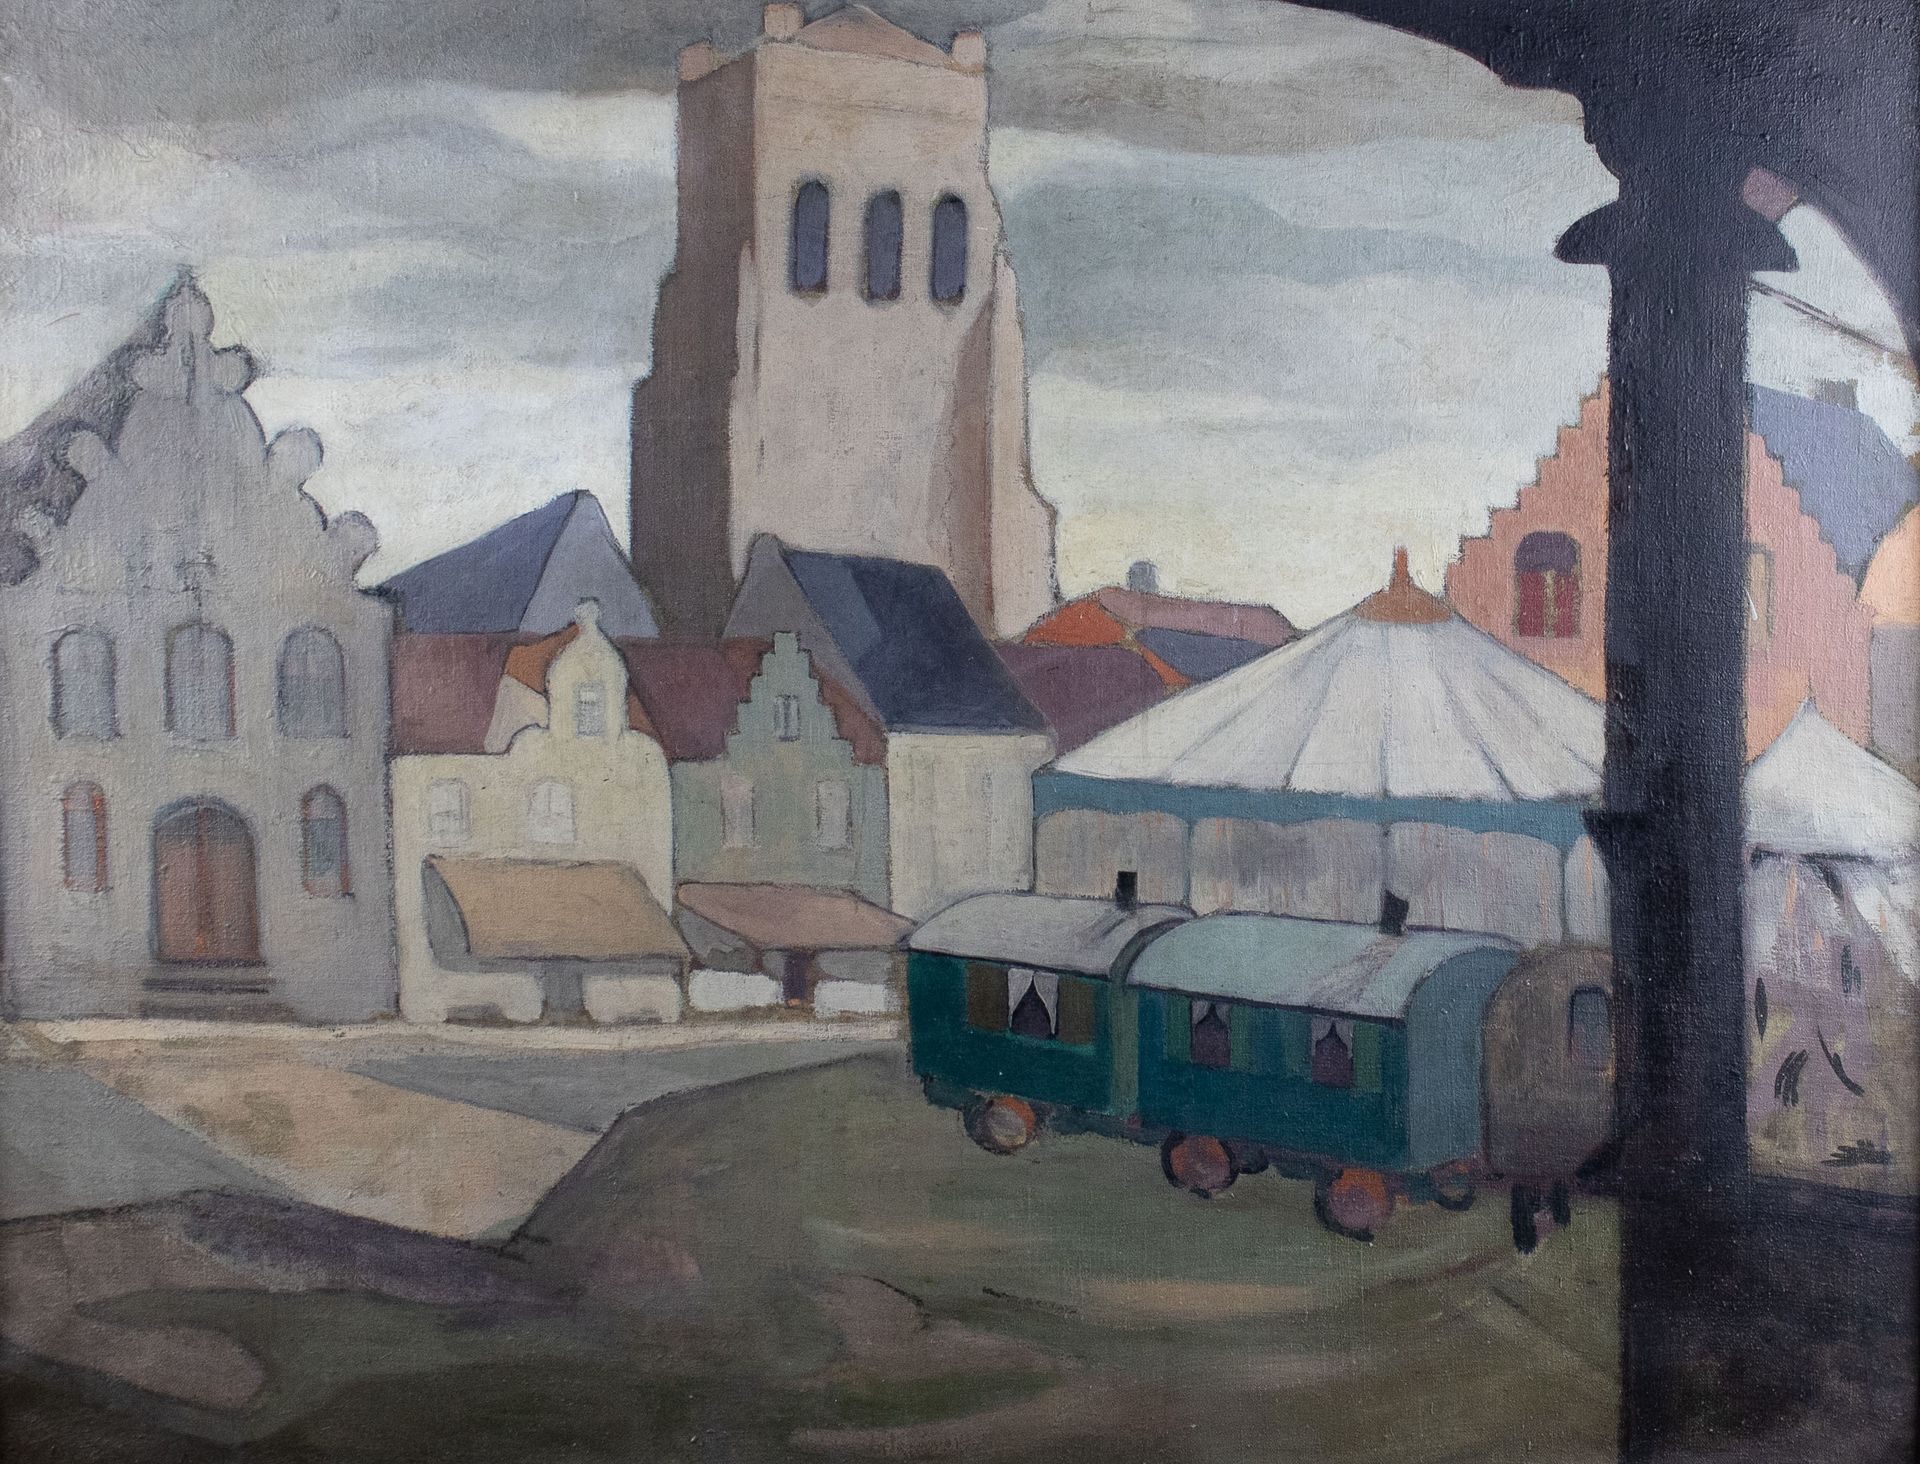 Jane CARION (1892-1945) 题目为'La place à Firnes'.Oil on canvas, dated 1926 and not&hellip;